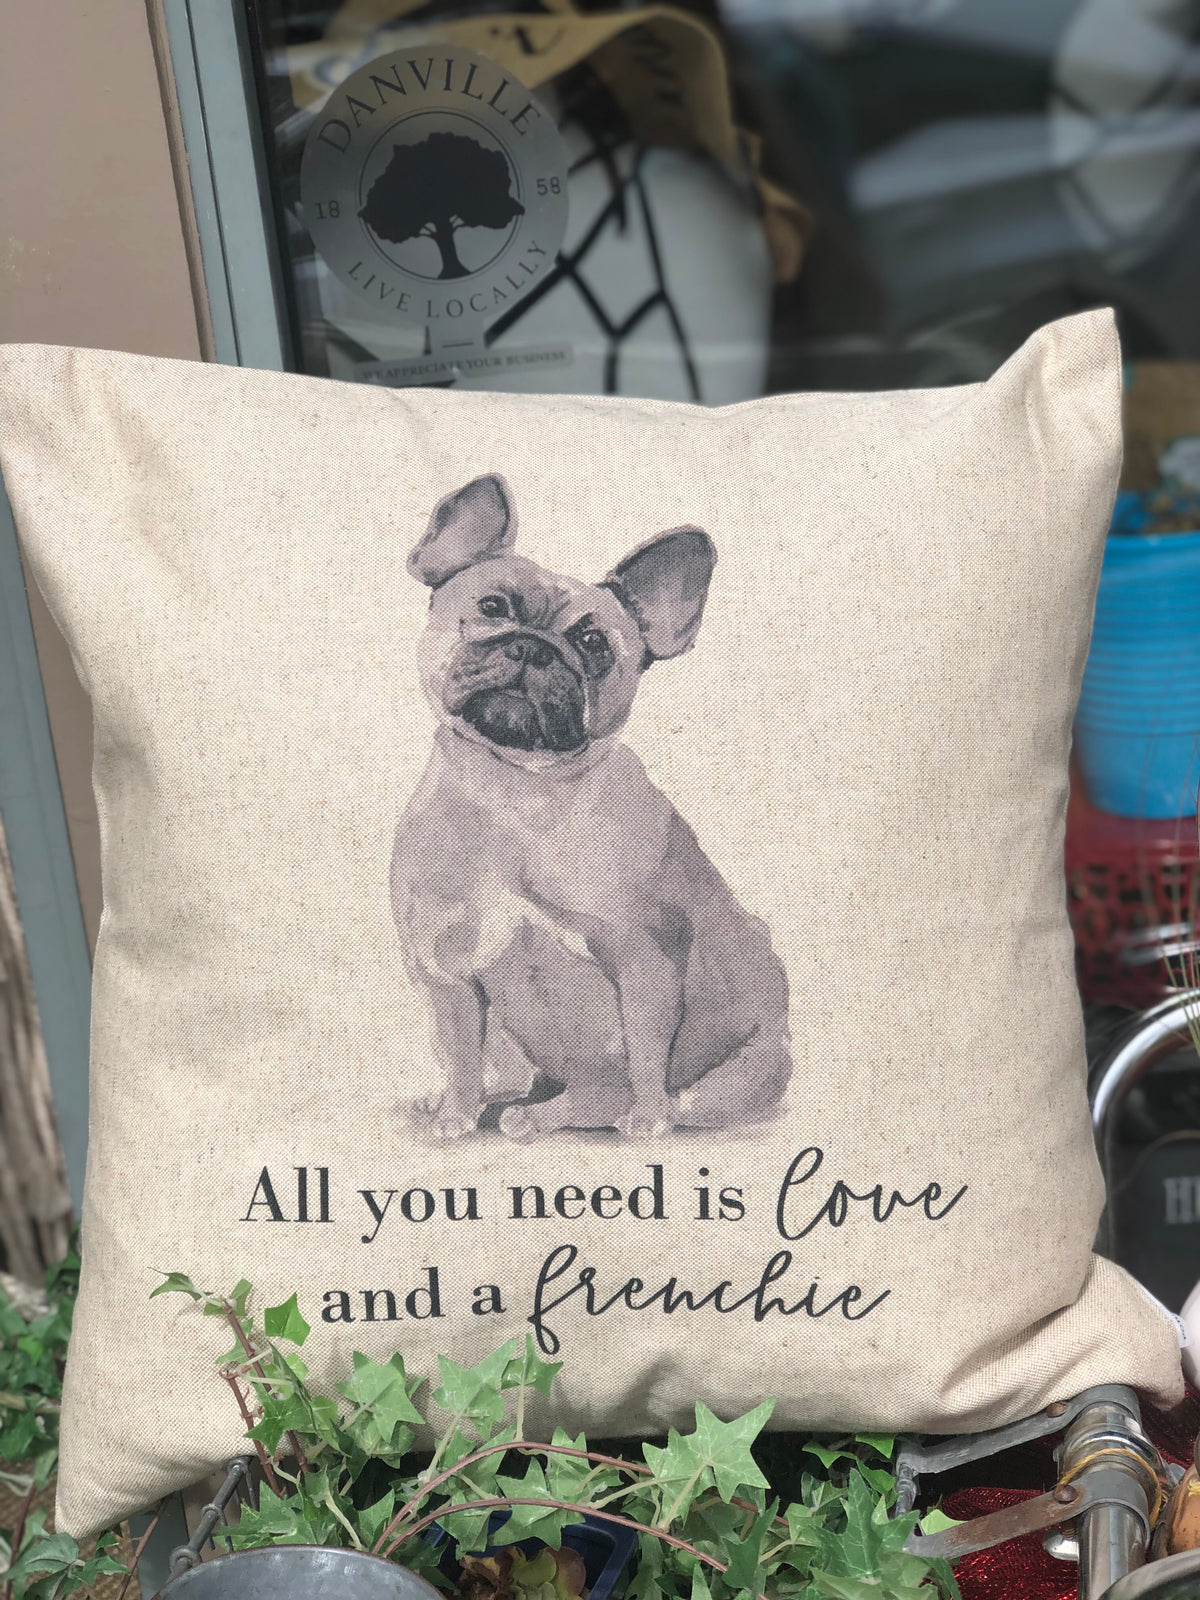 All you need is FRENCHI PILLOW